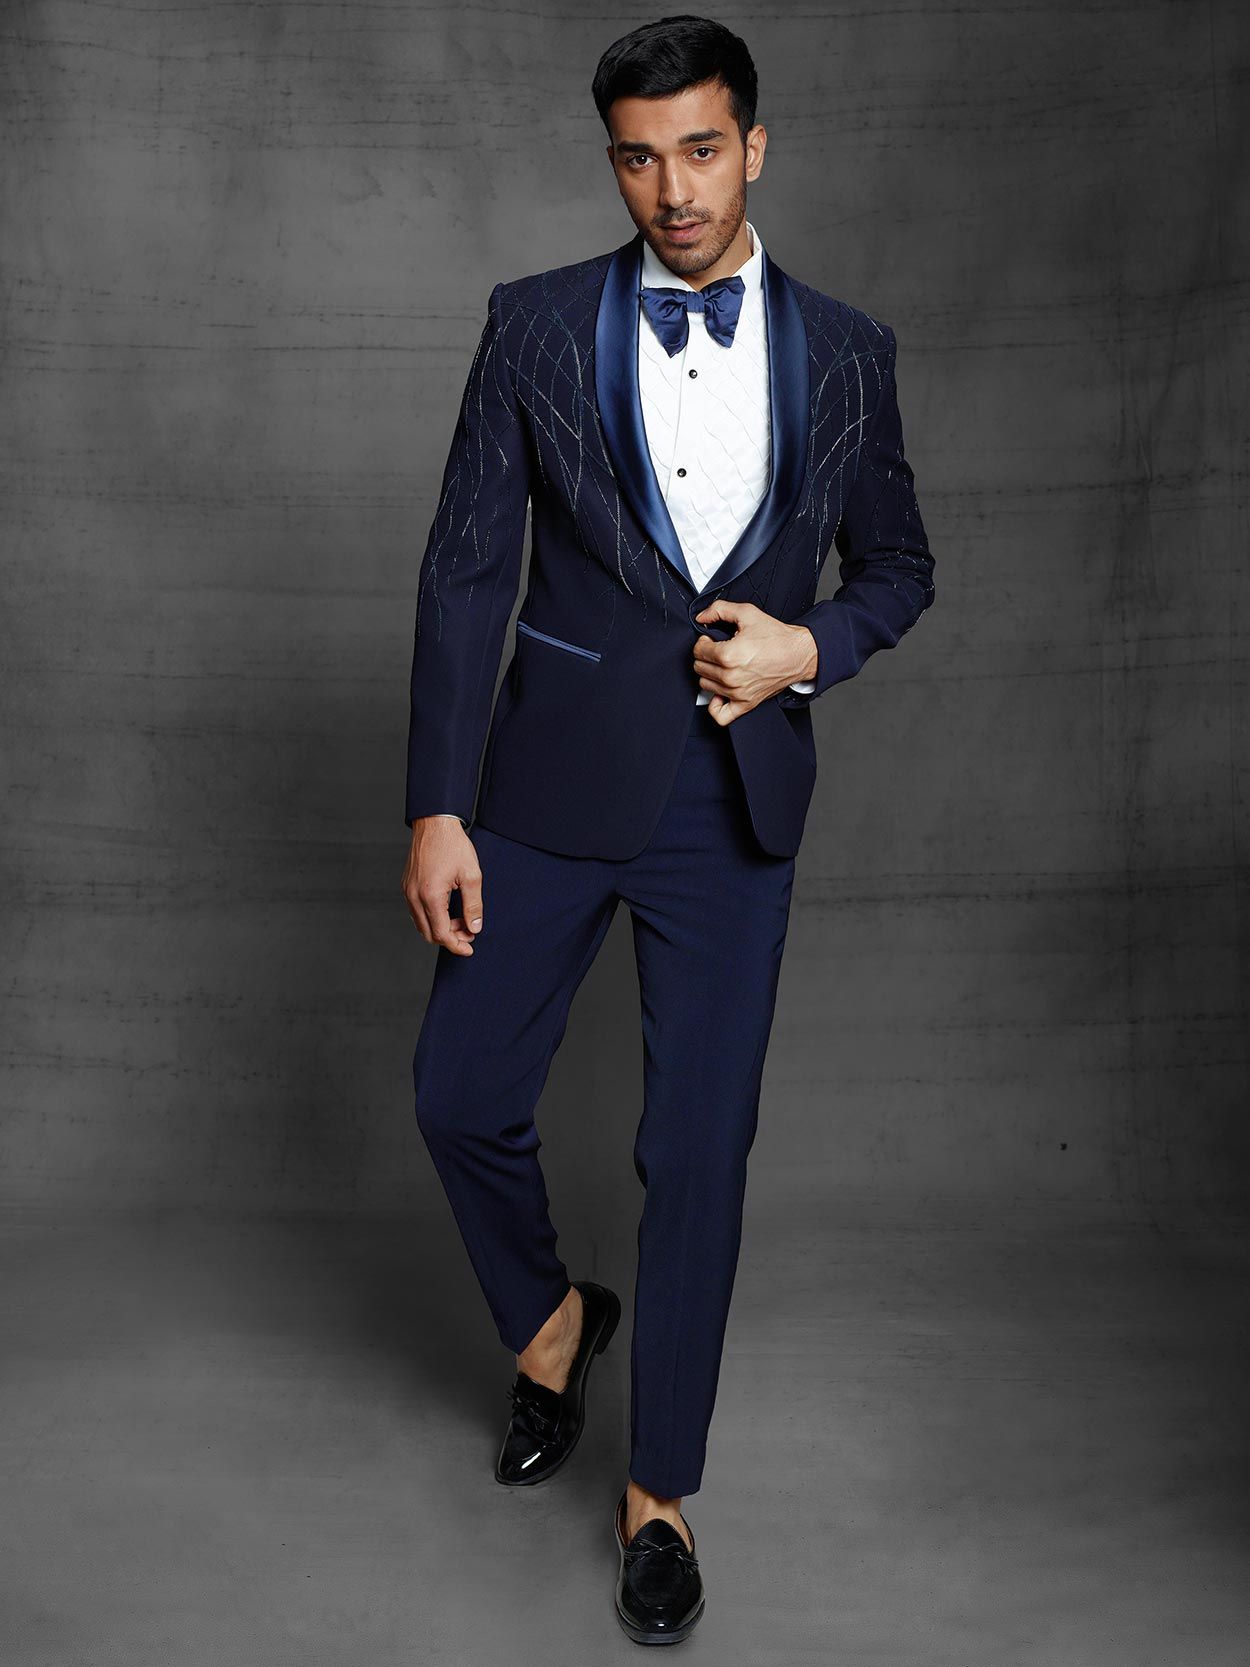 Best Blue Wedding Suits in Navy, Royal, Dusty & Light